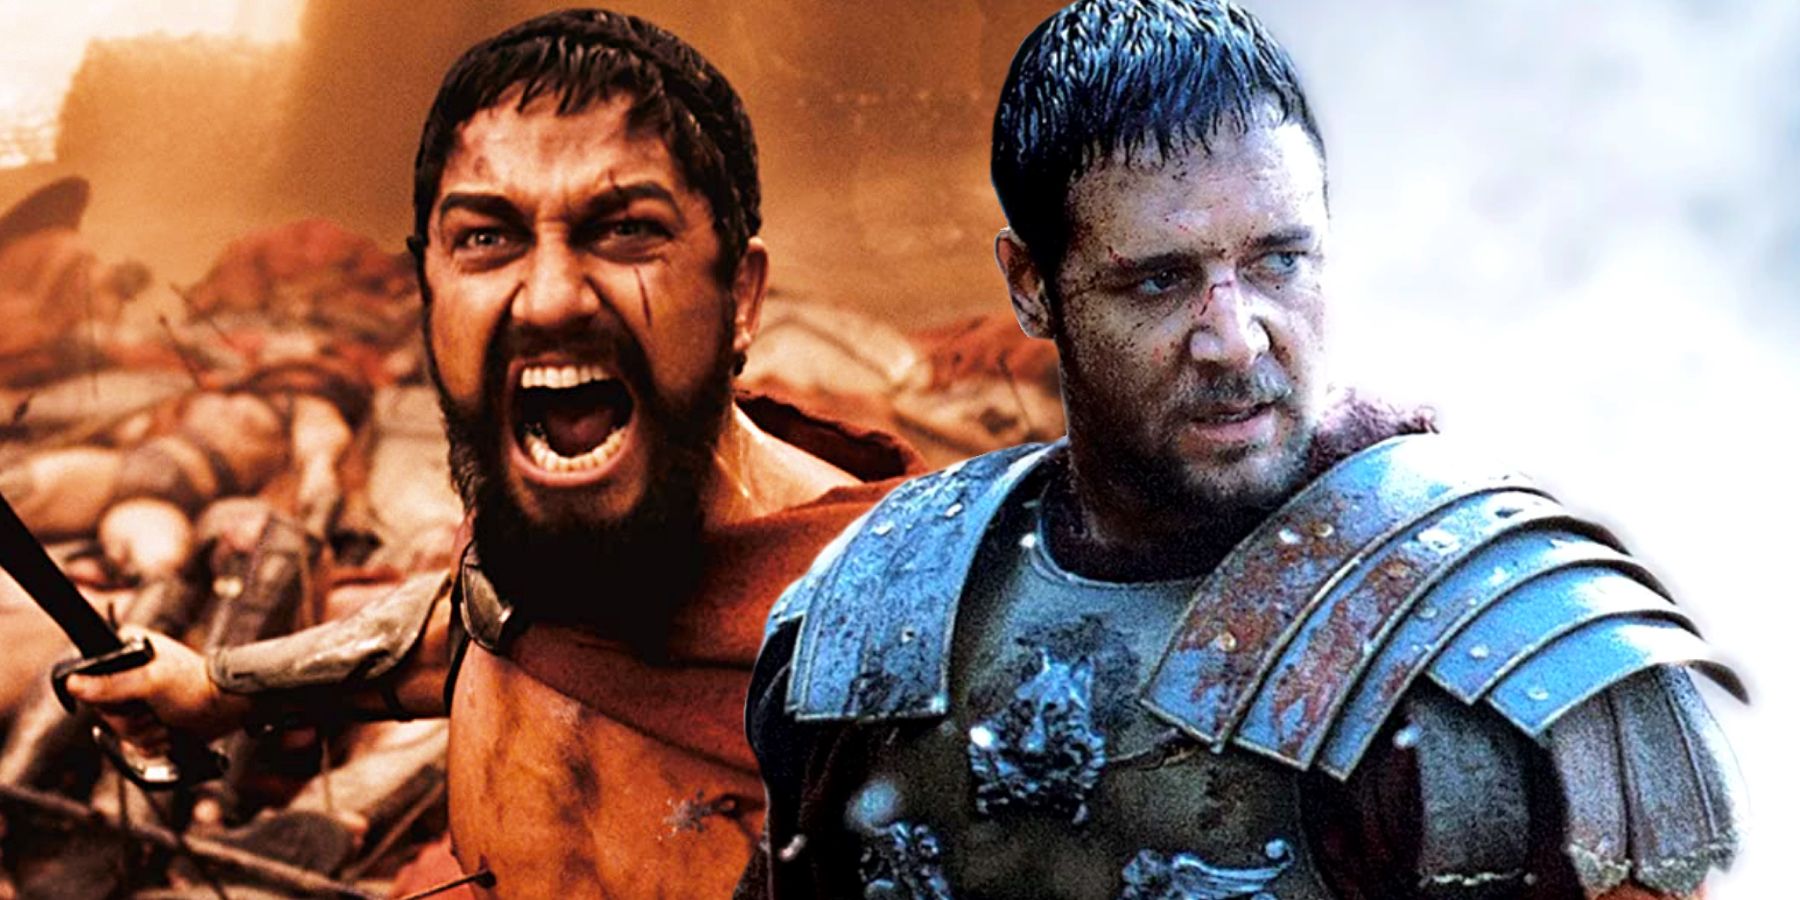 Russell Crowe in Gladiator and Gerard Butler in 300